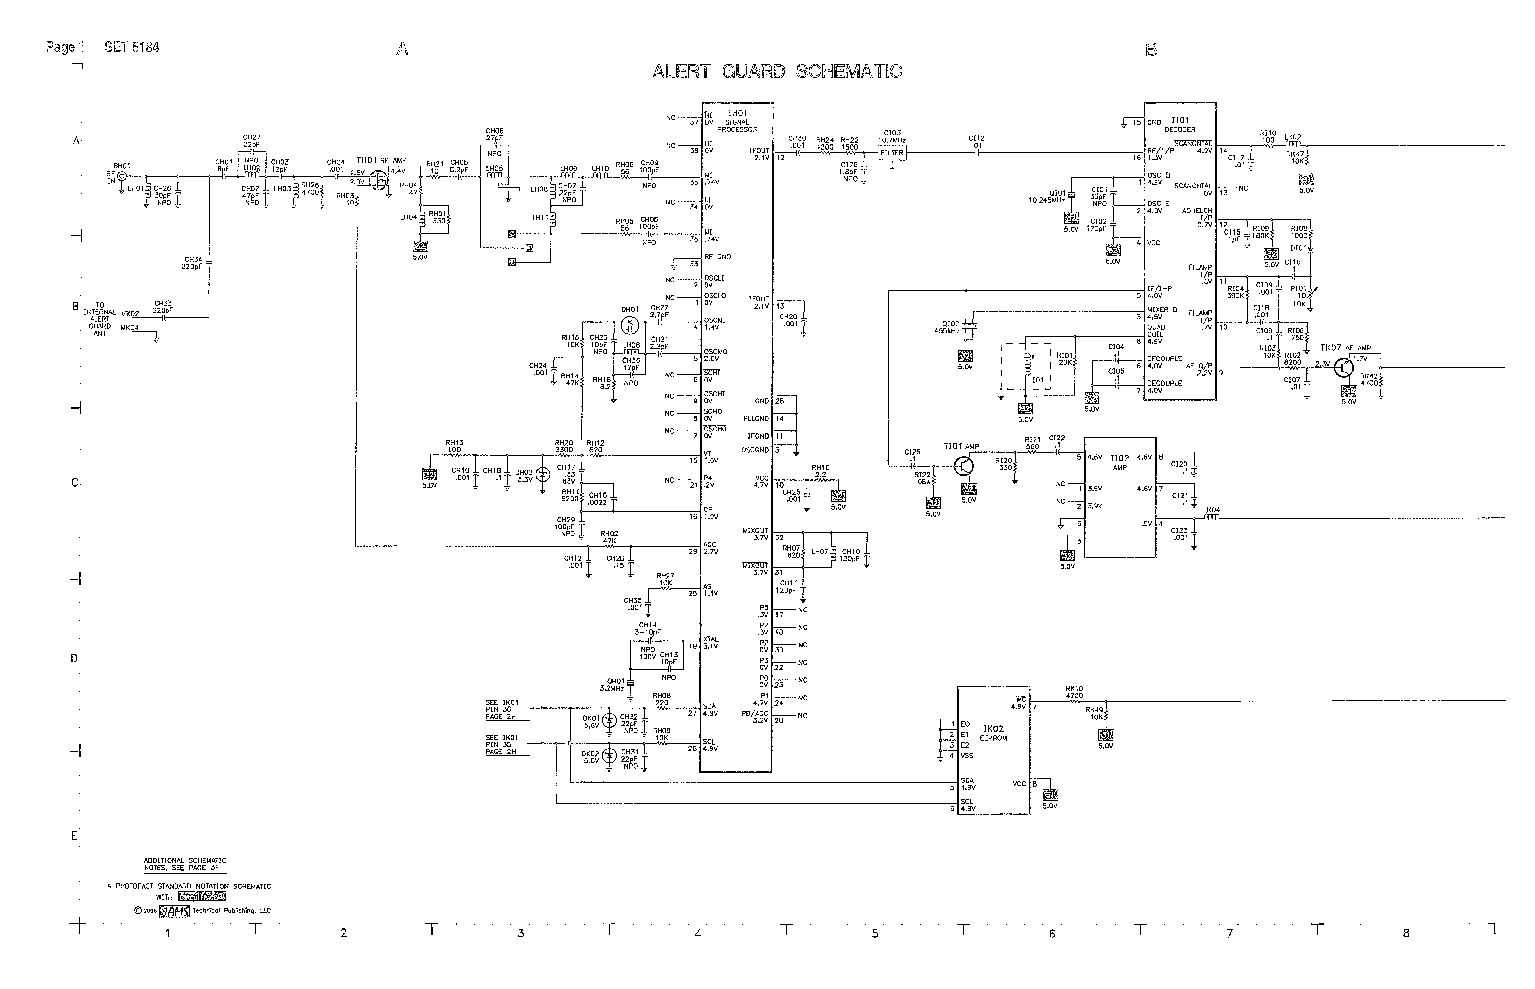 RCA 27F671 service manual (2nd page)